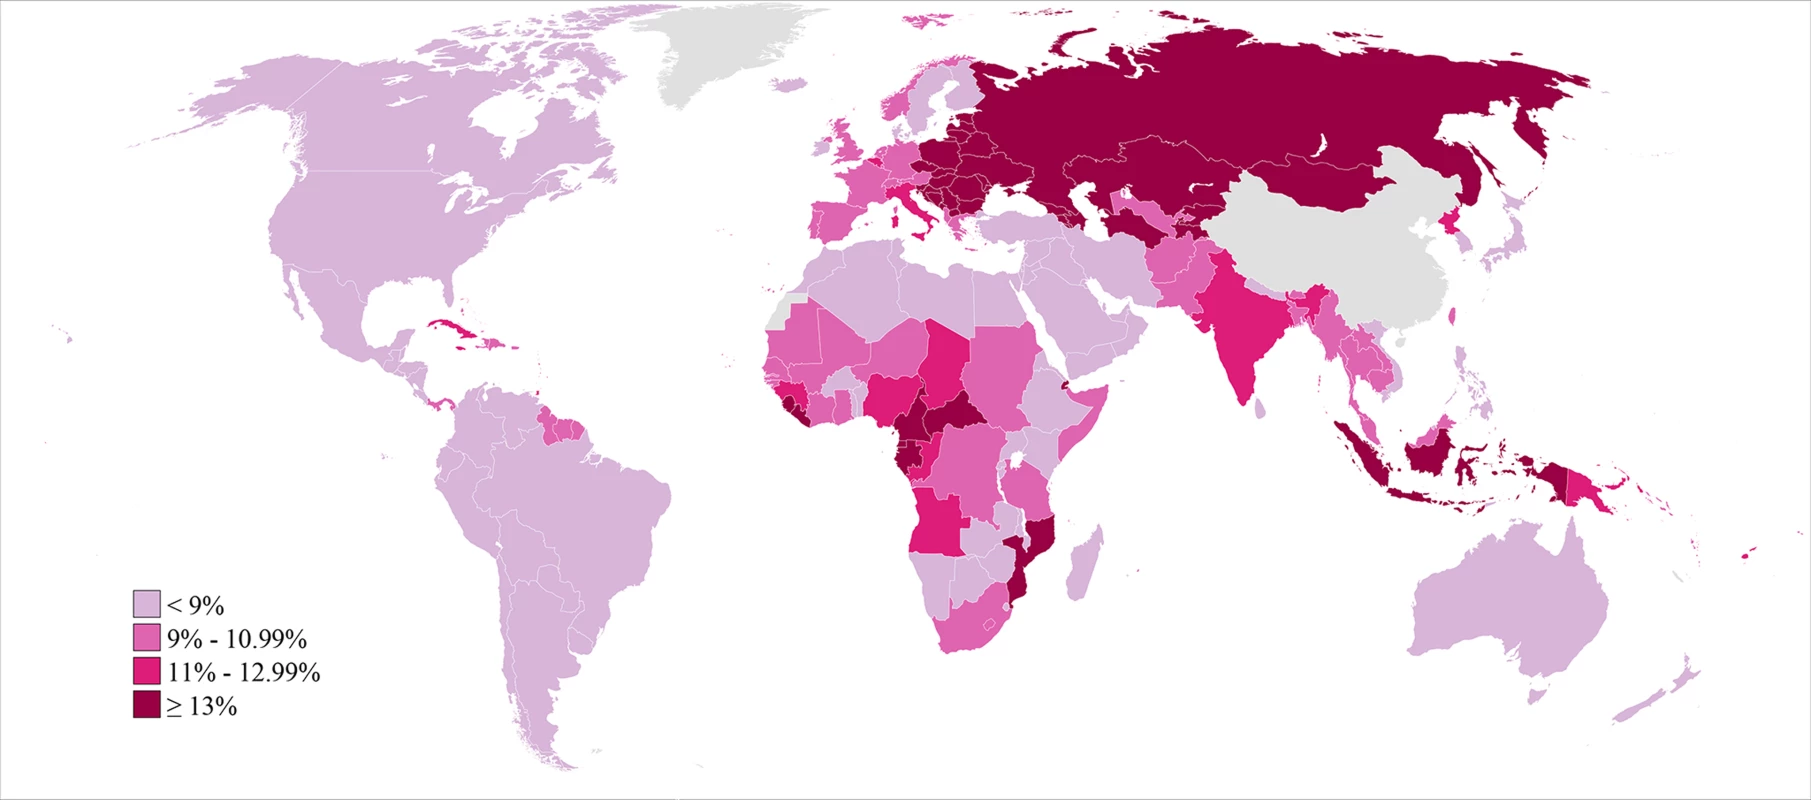 Prevalence of secondary infertility among women who have had a live birth and seek another, in 2010.